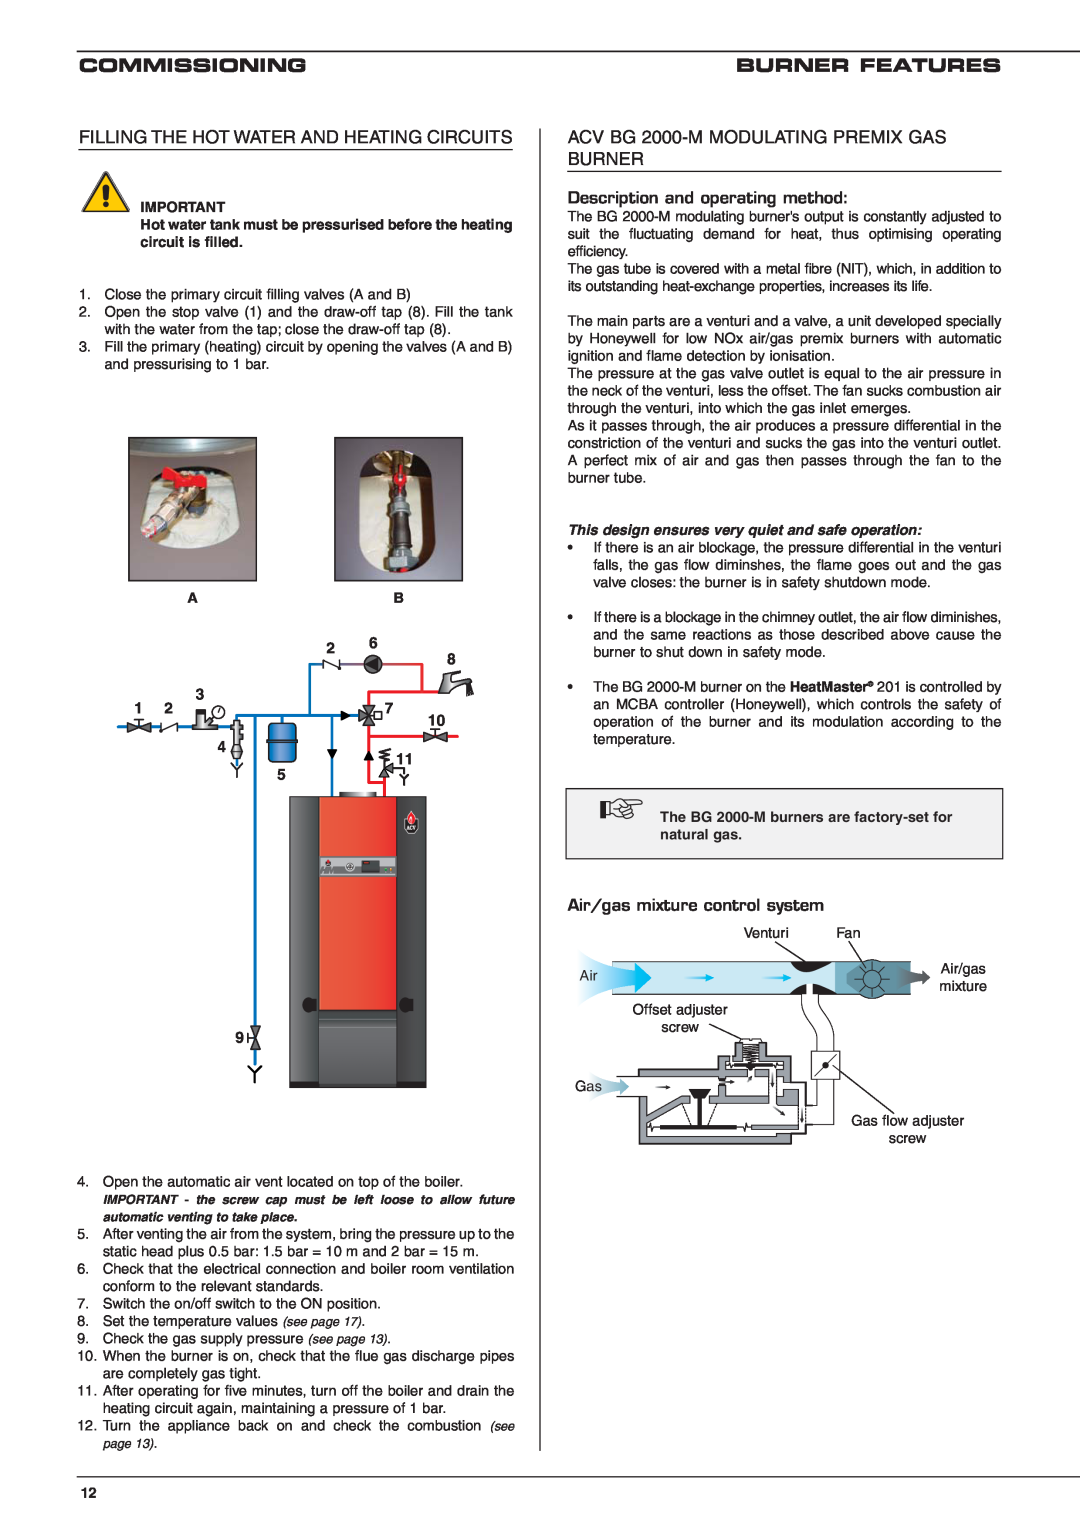 Heatmaster 201 manual Commissioning, Burner Features, Description and operating method, Air/gas mixture control system 